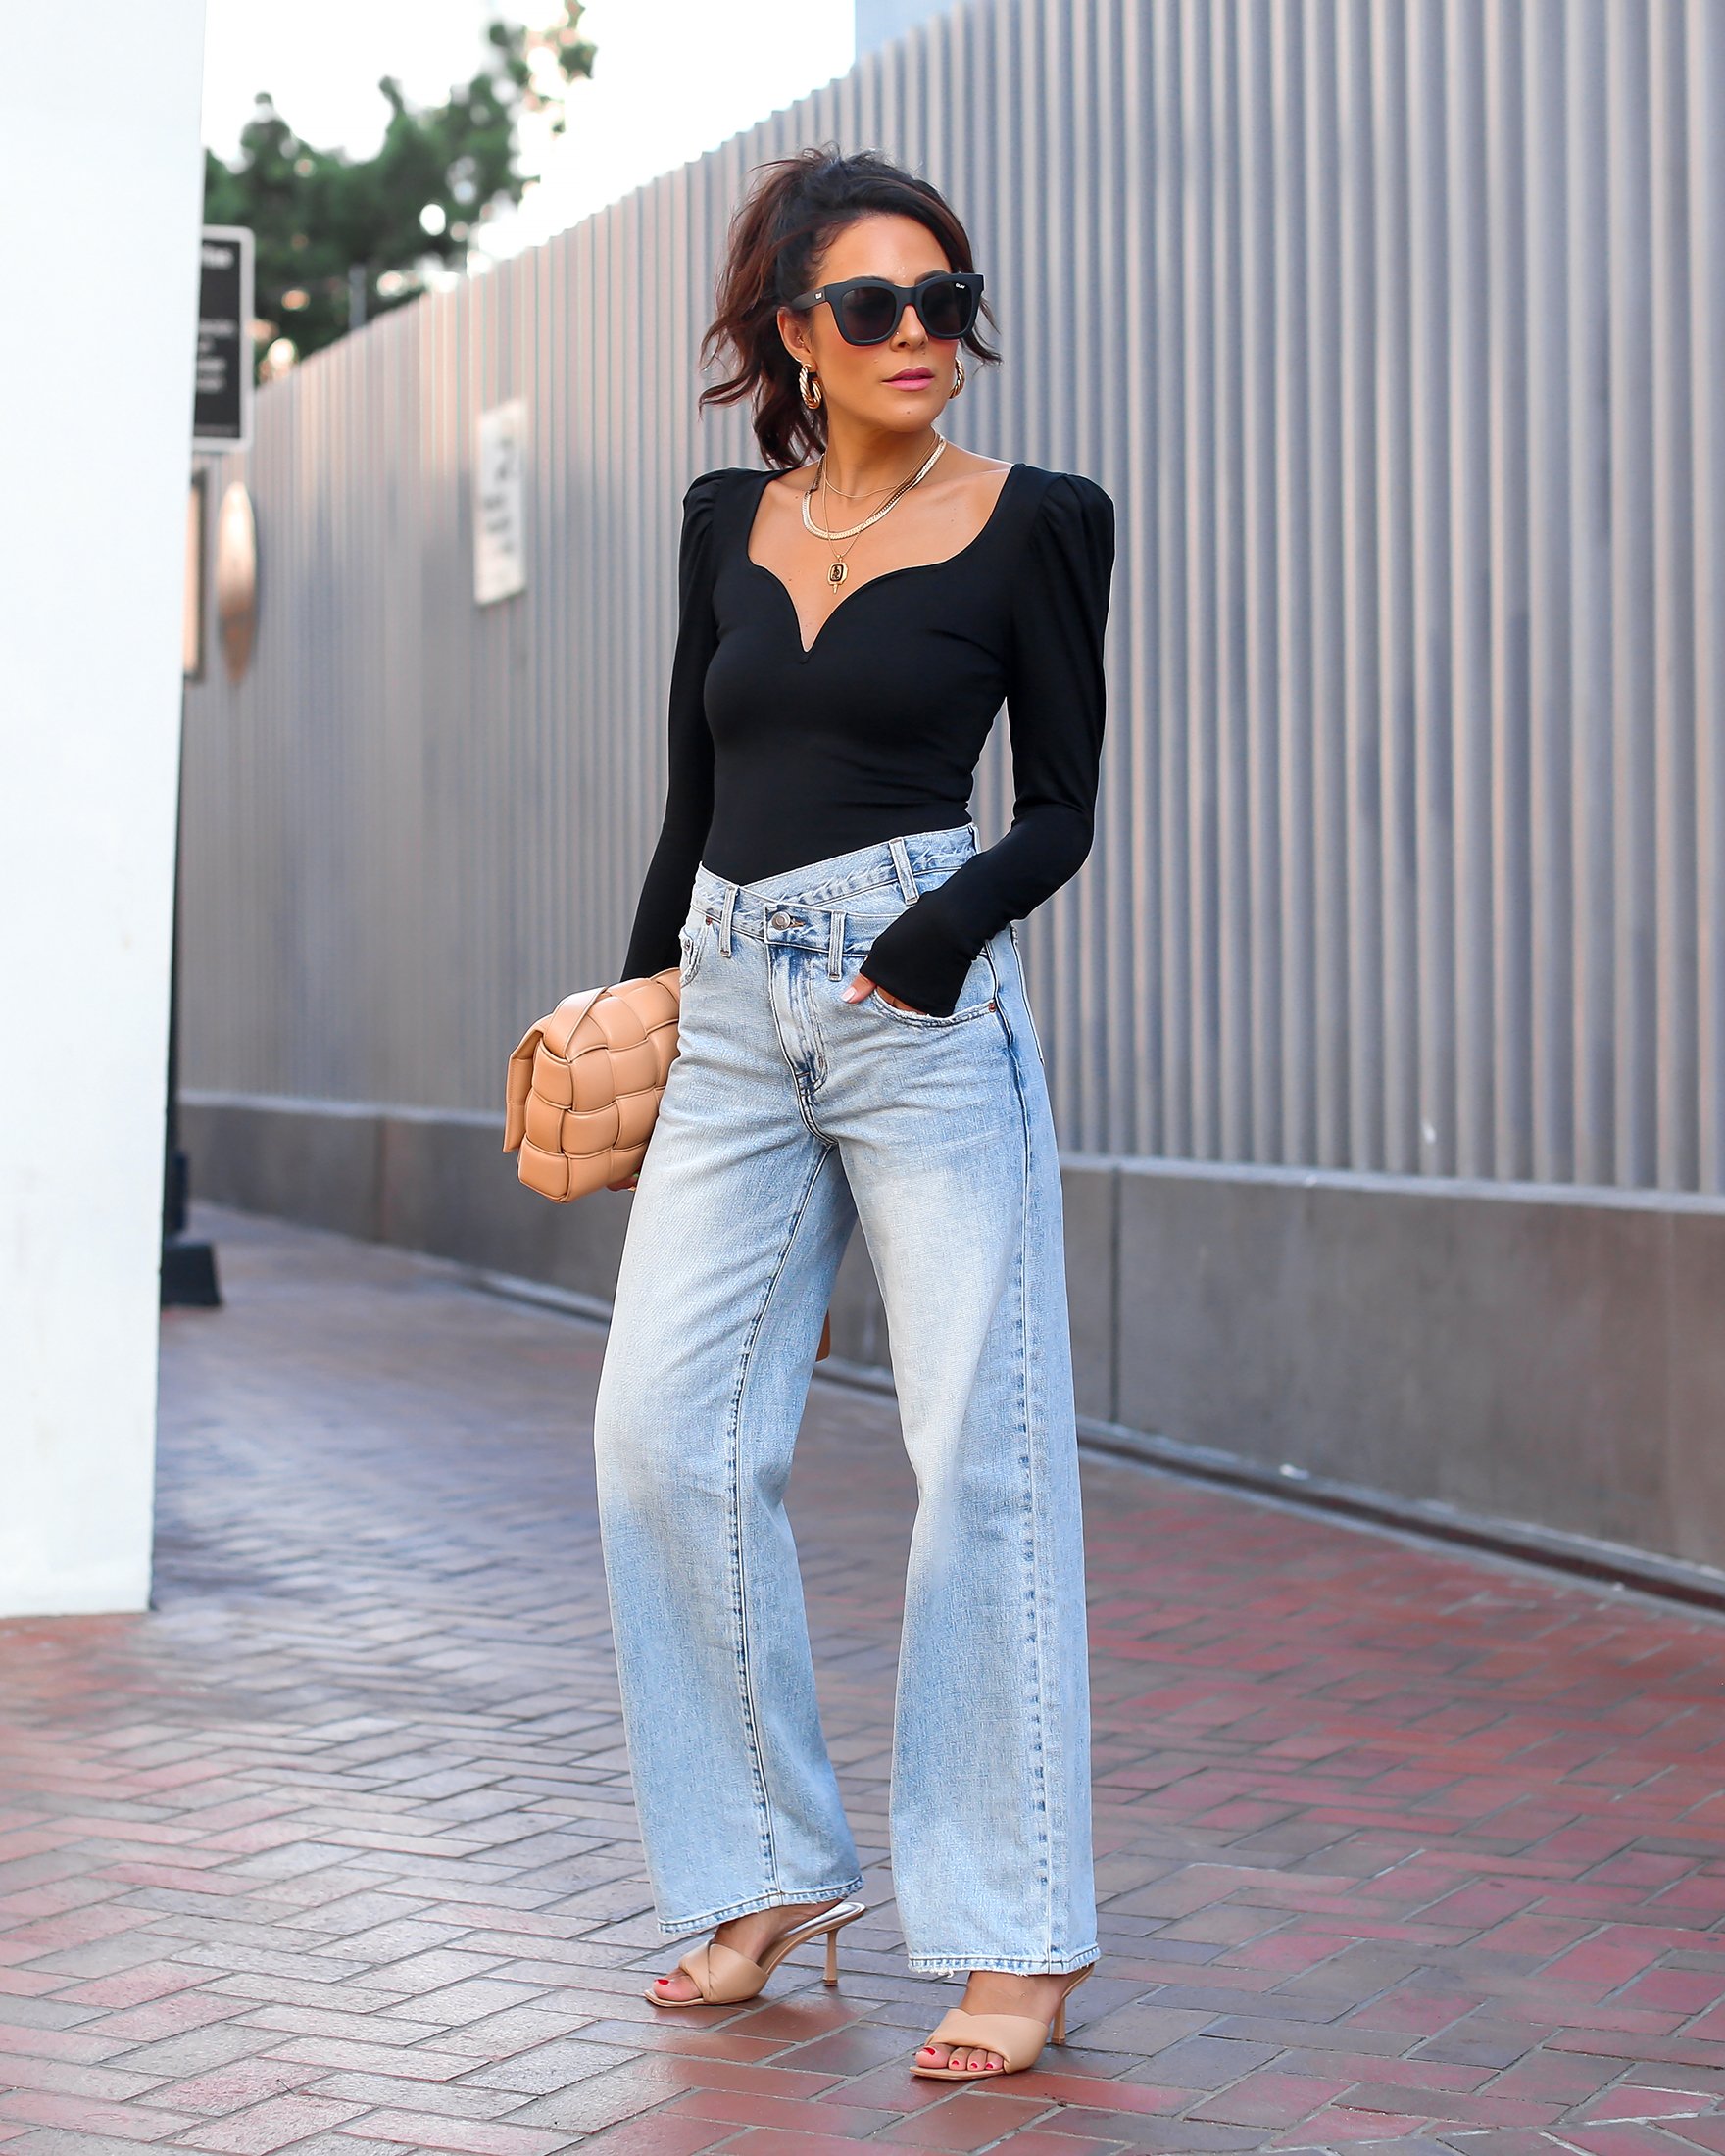 20 Outfit Ideas to Wear This Spring — Lucy's whims